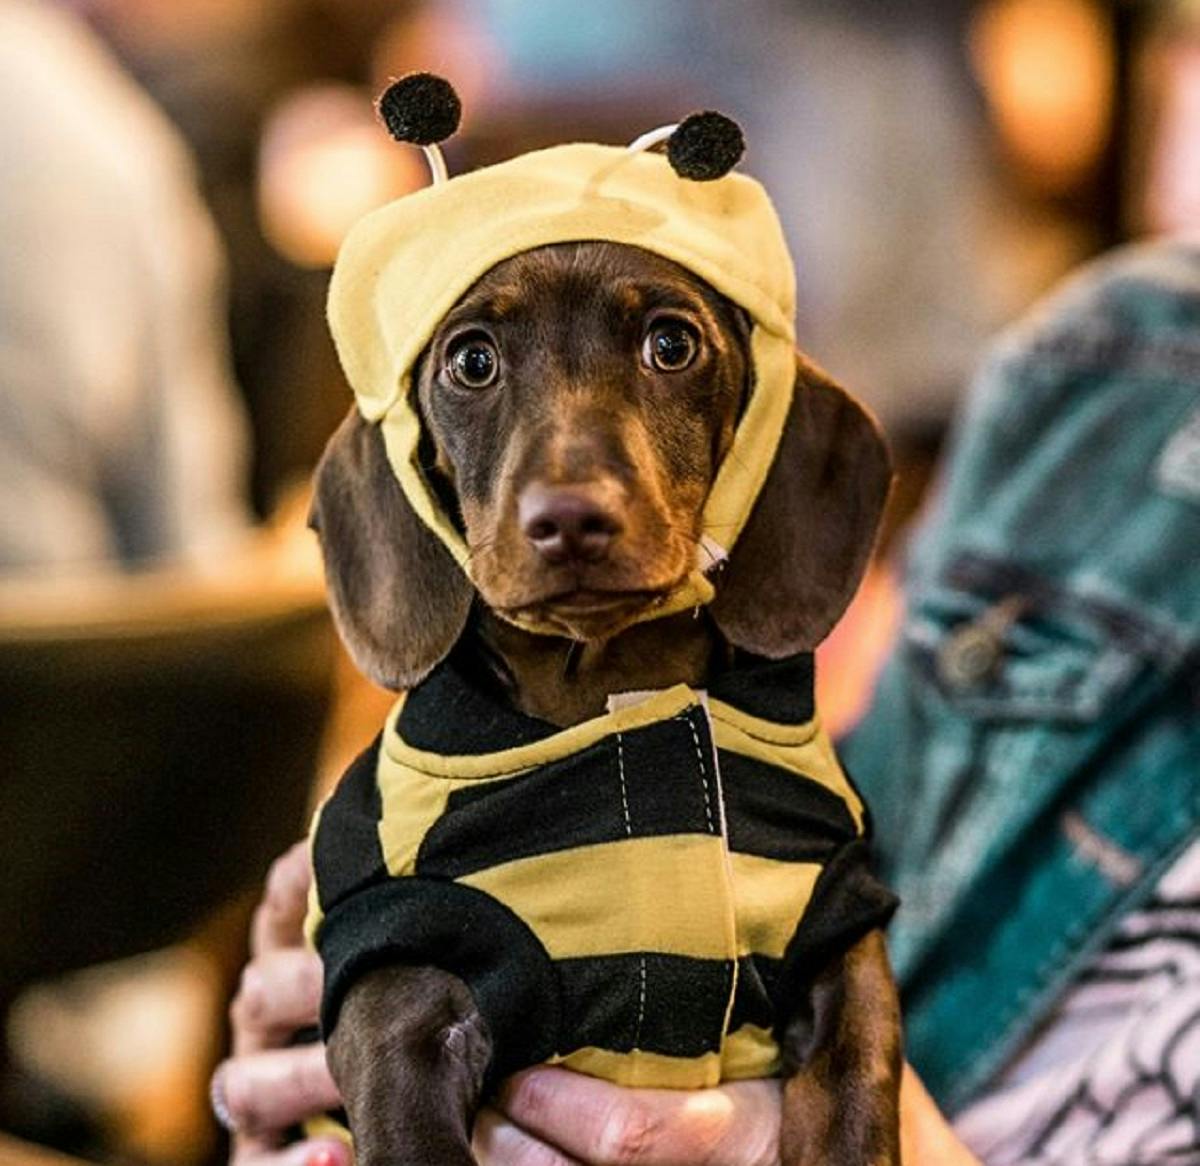 A cafe full of cute sausage dogs is coming to Manchester this month – a Pup Up Cafe!